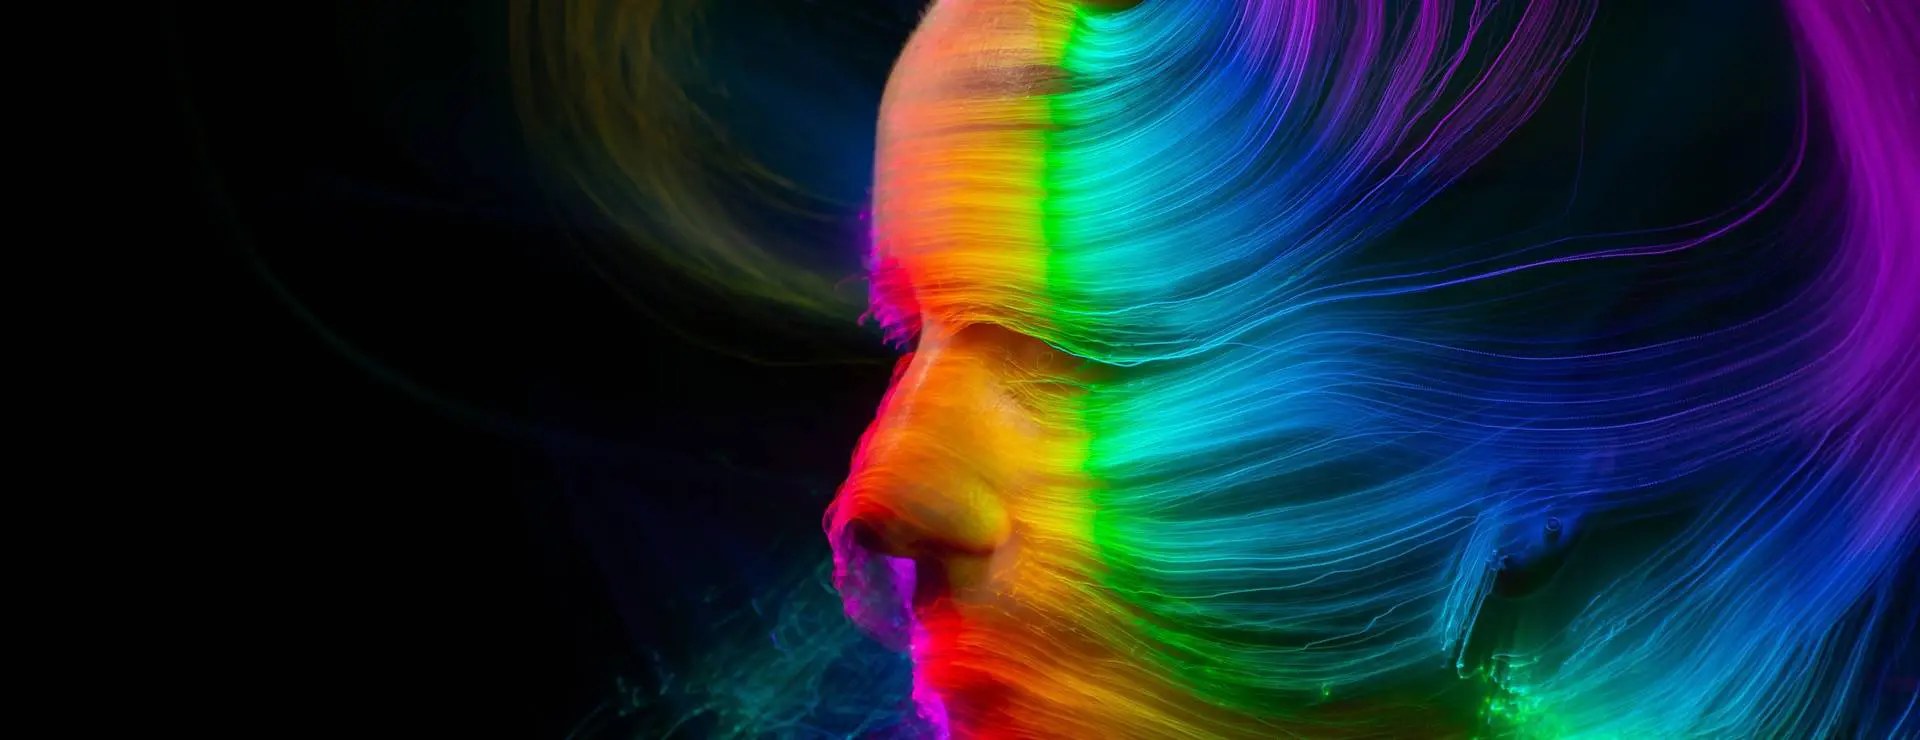 A blurry image of a person 's face with rainbow colors.